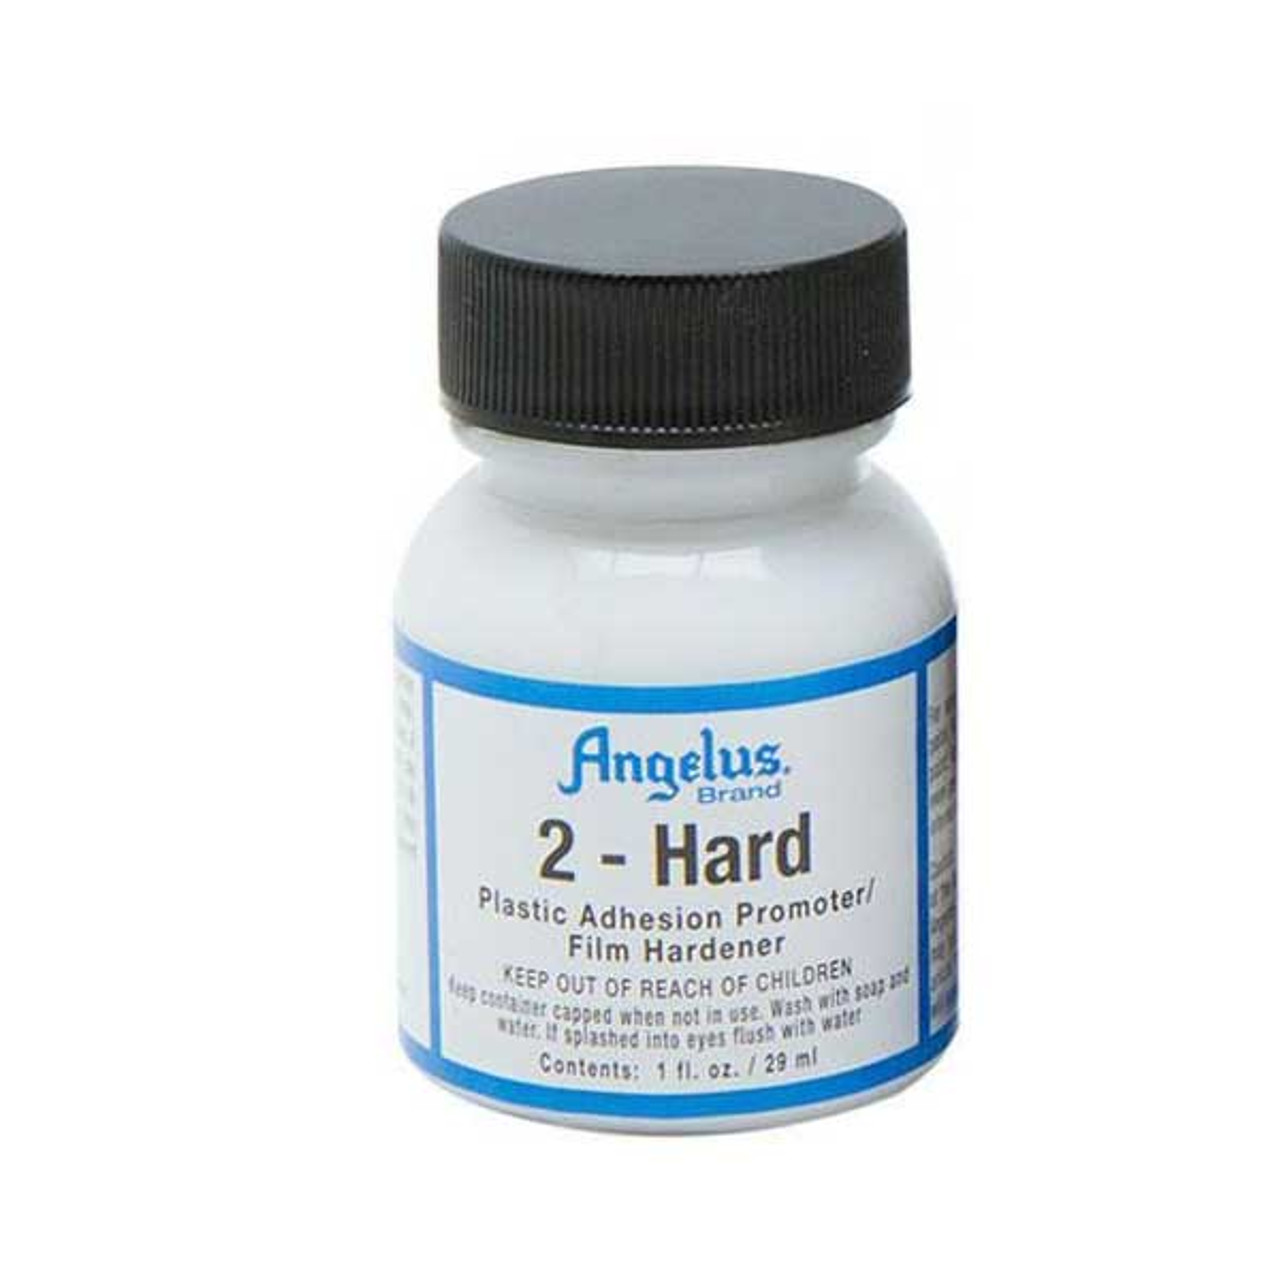 Paint hardener Paint Additives at